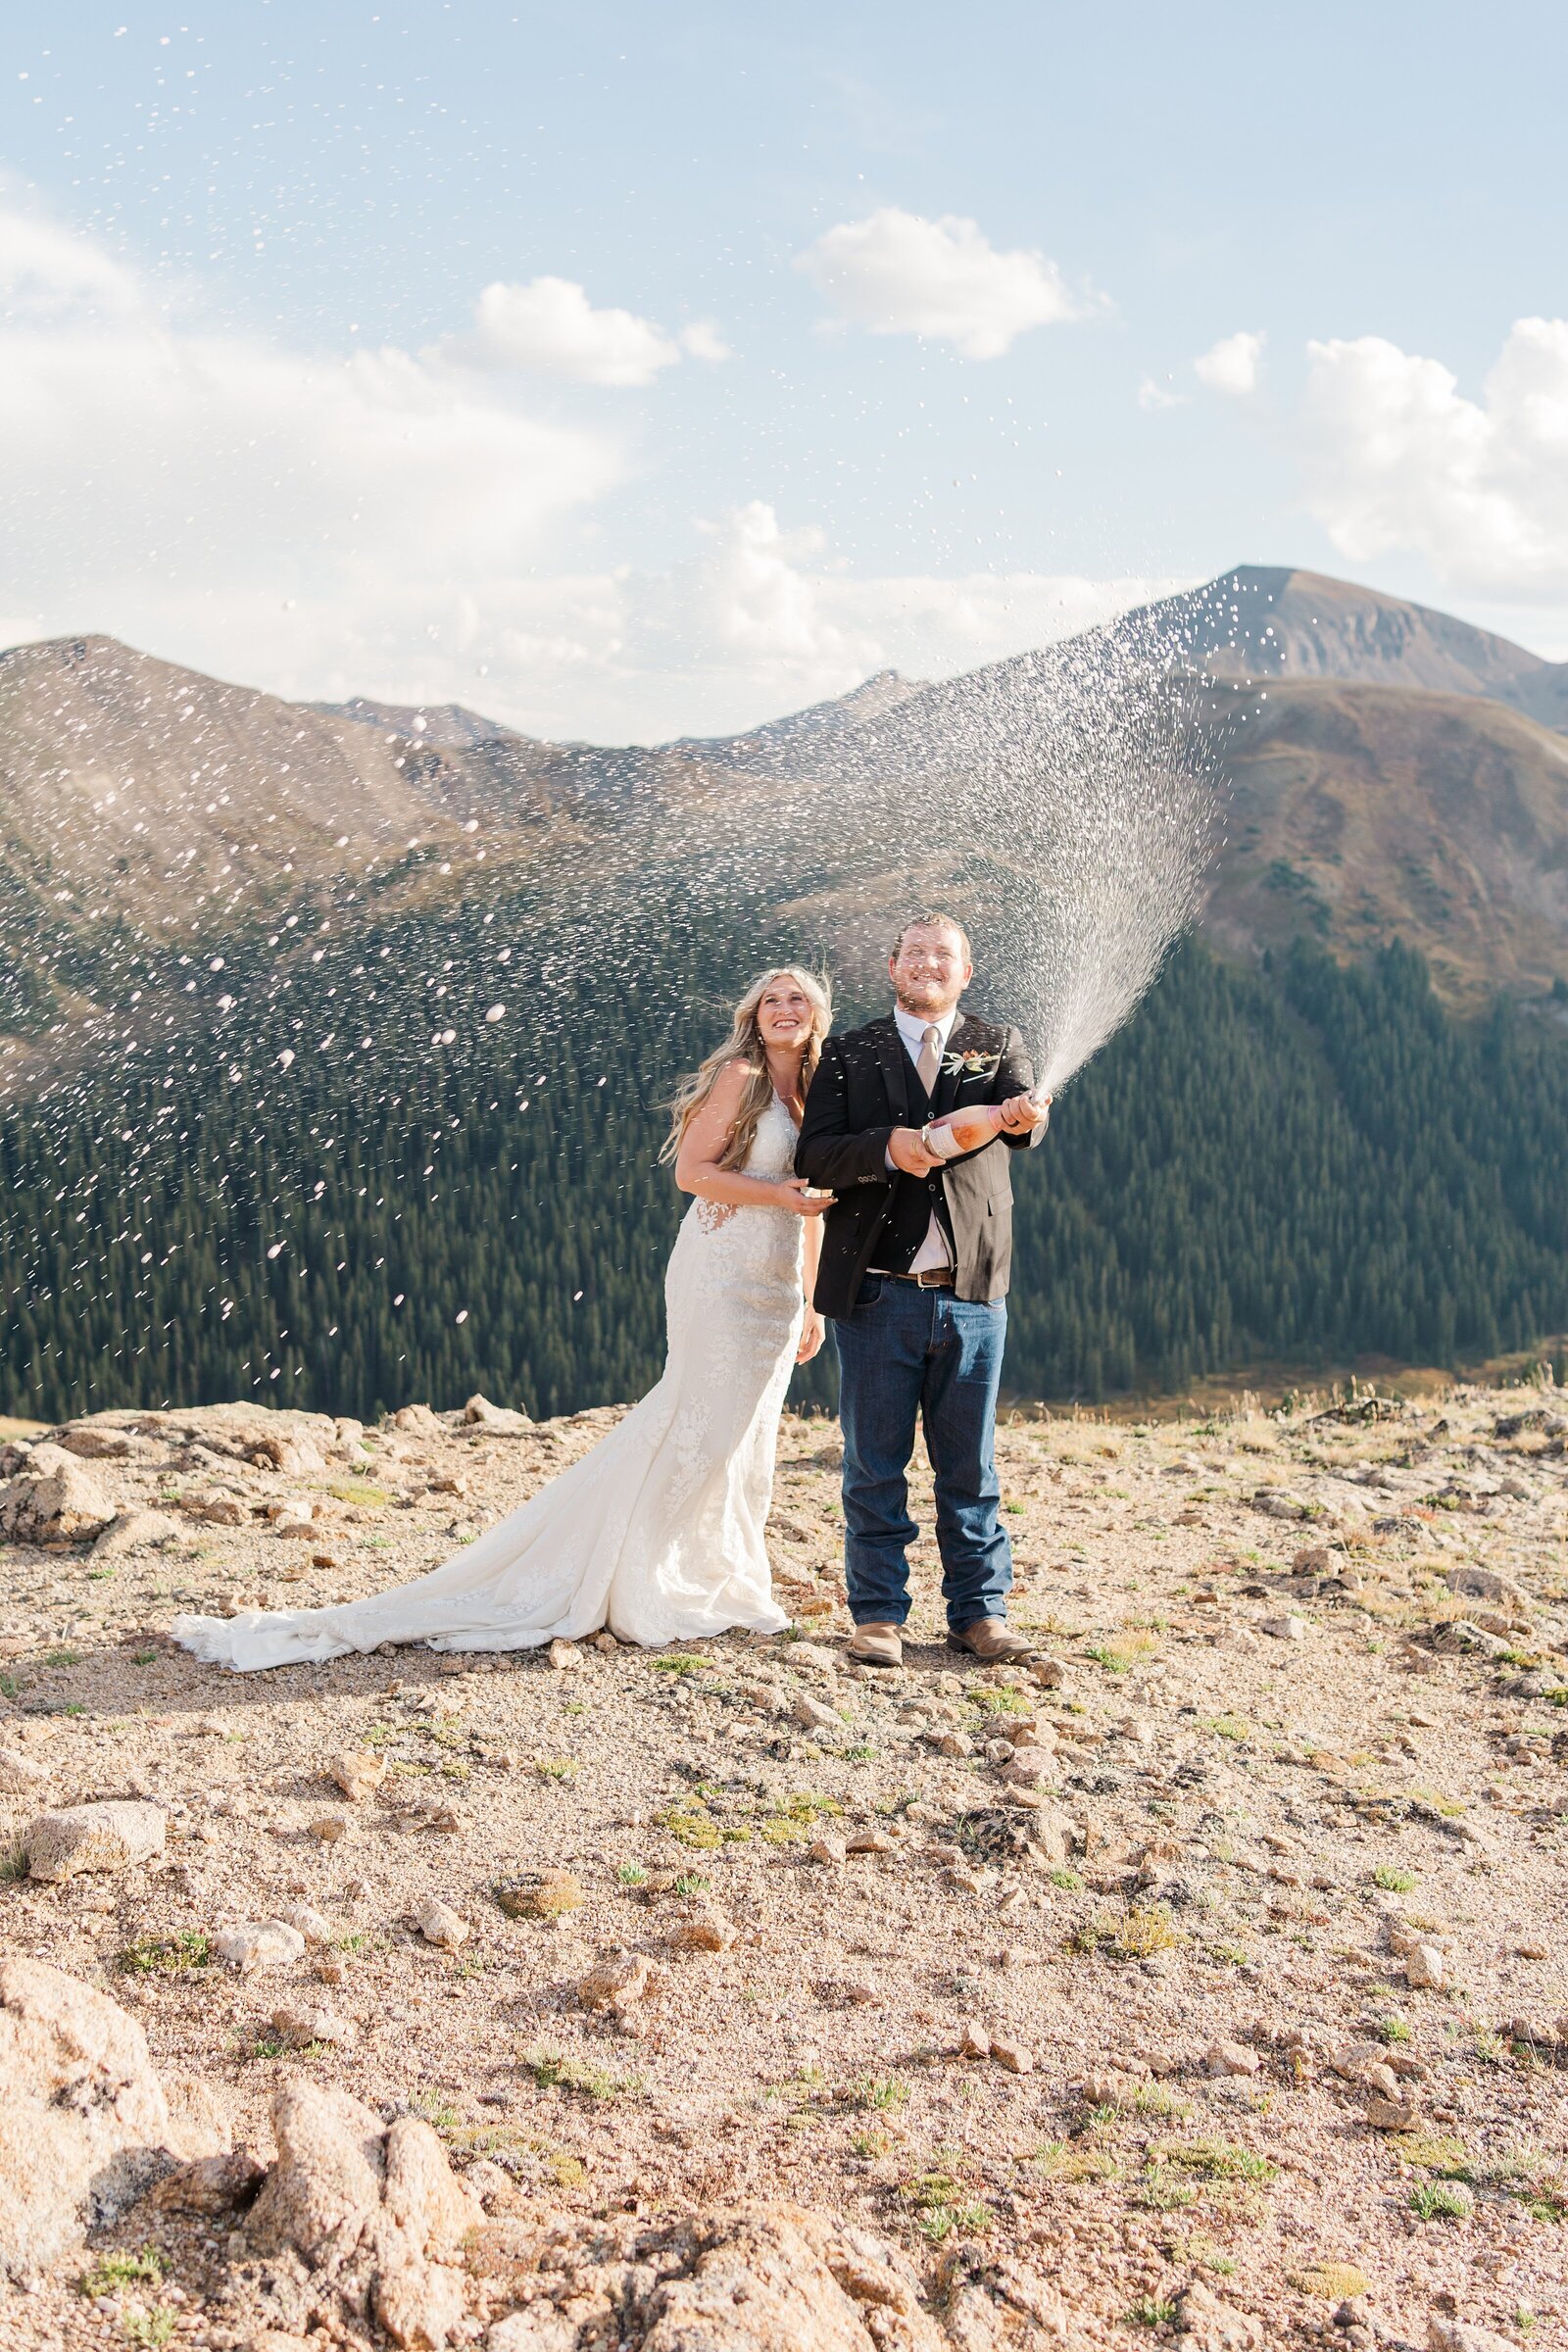 Let us capture the joy and intimacy of your Colorado wedding with Samantha Immer Photography. Our authentic and meaningful approach will tell the story of your love.